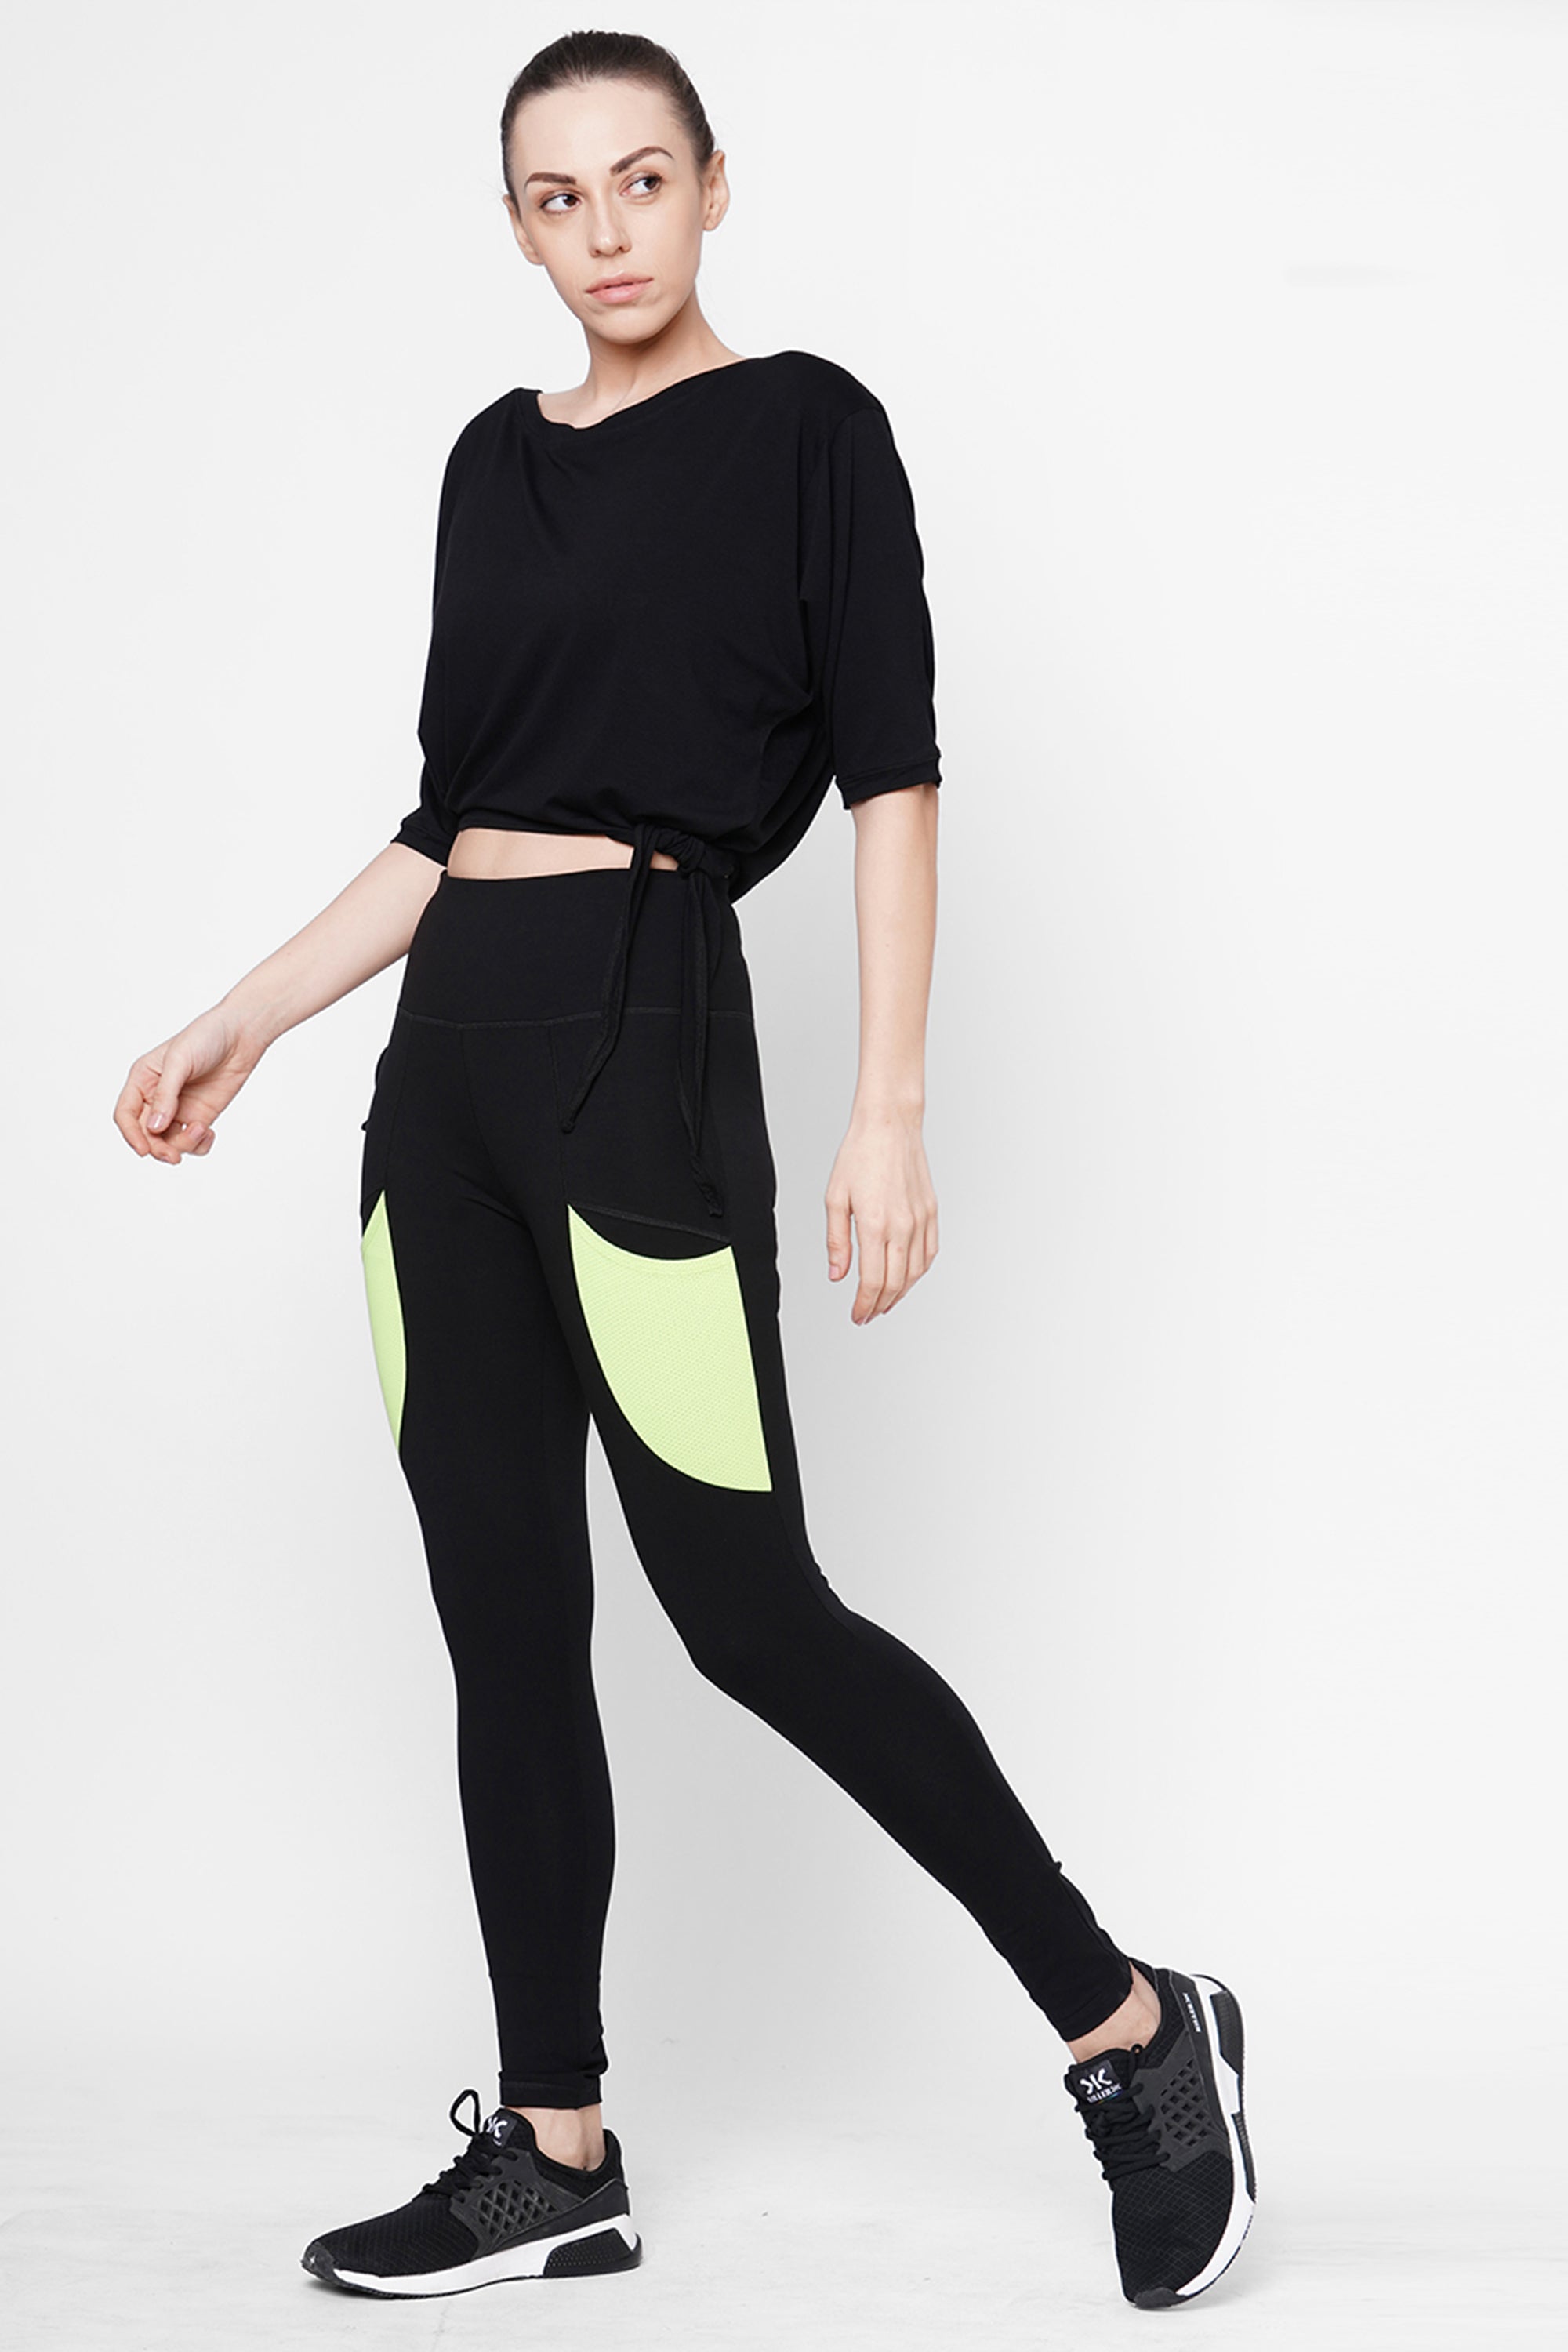 Black Leggings With Neon Green Patch